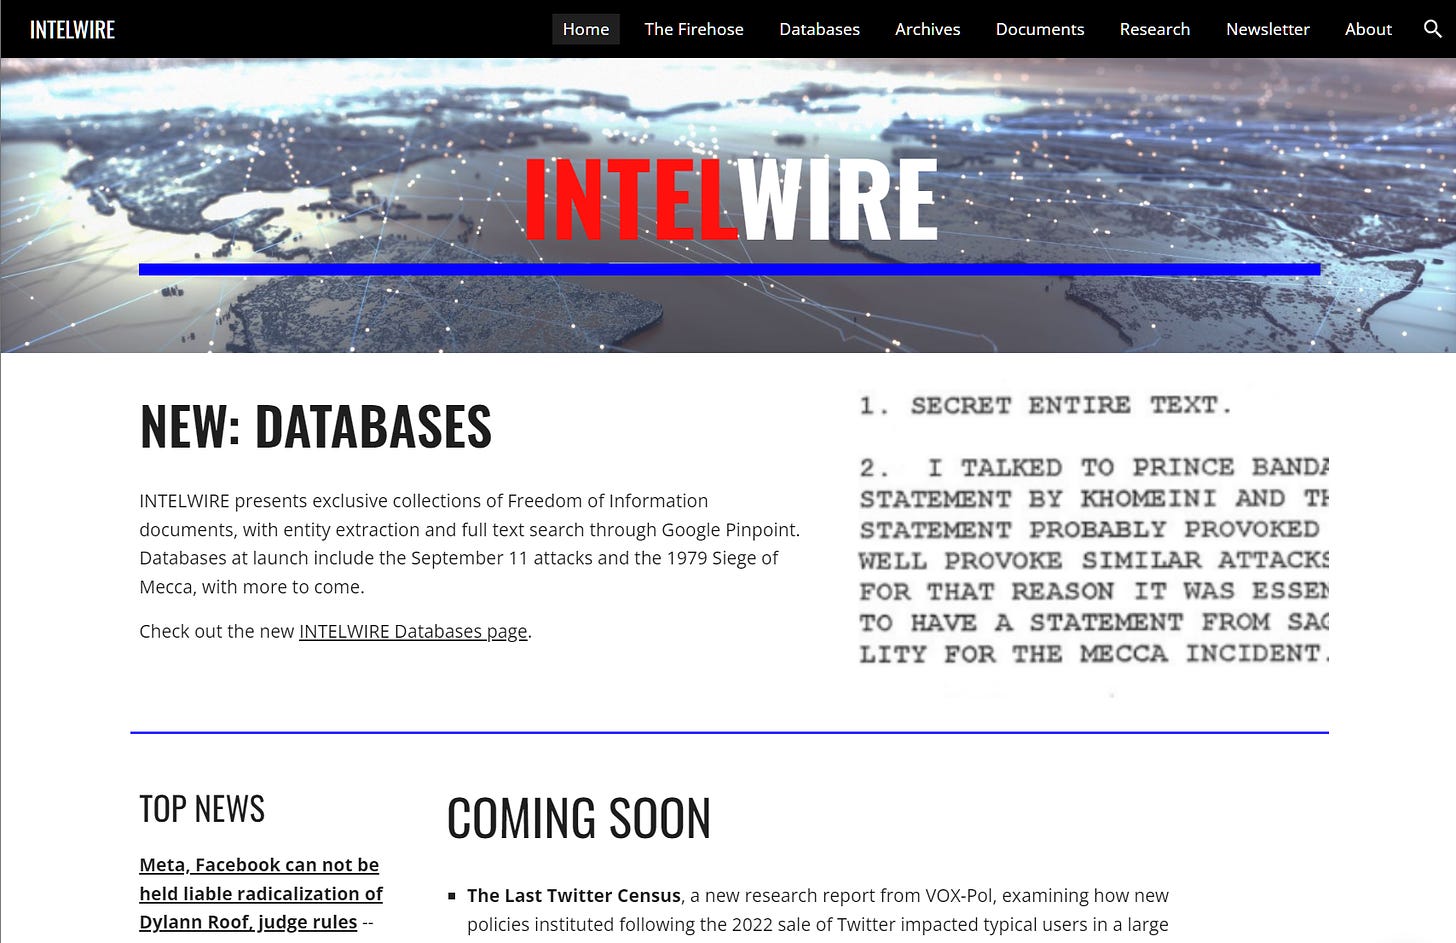 Image of the new INTELWIRE home page